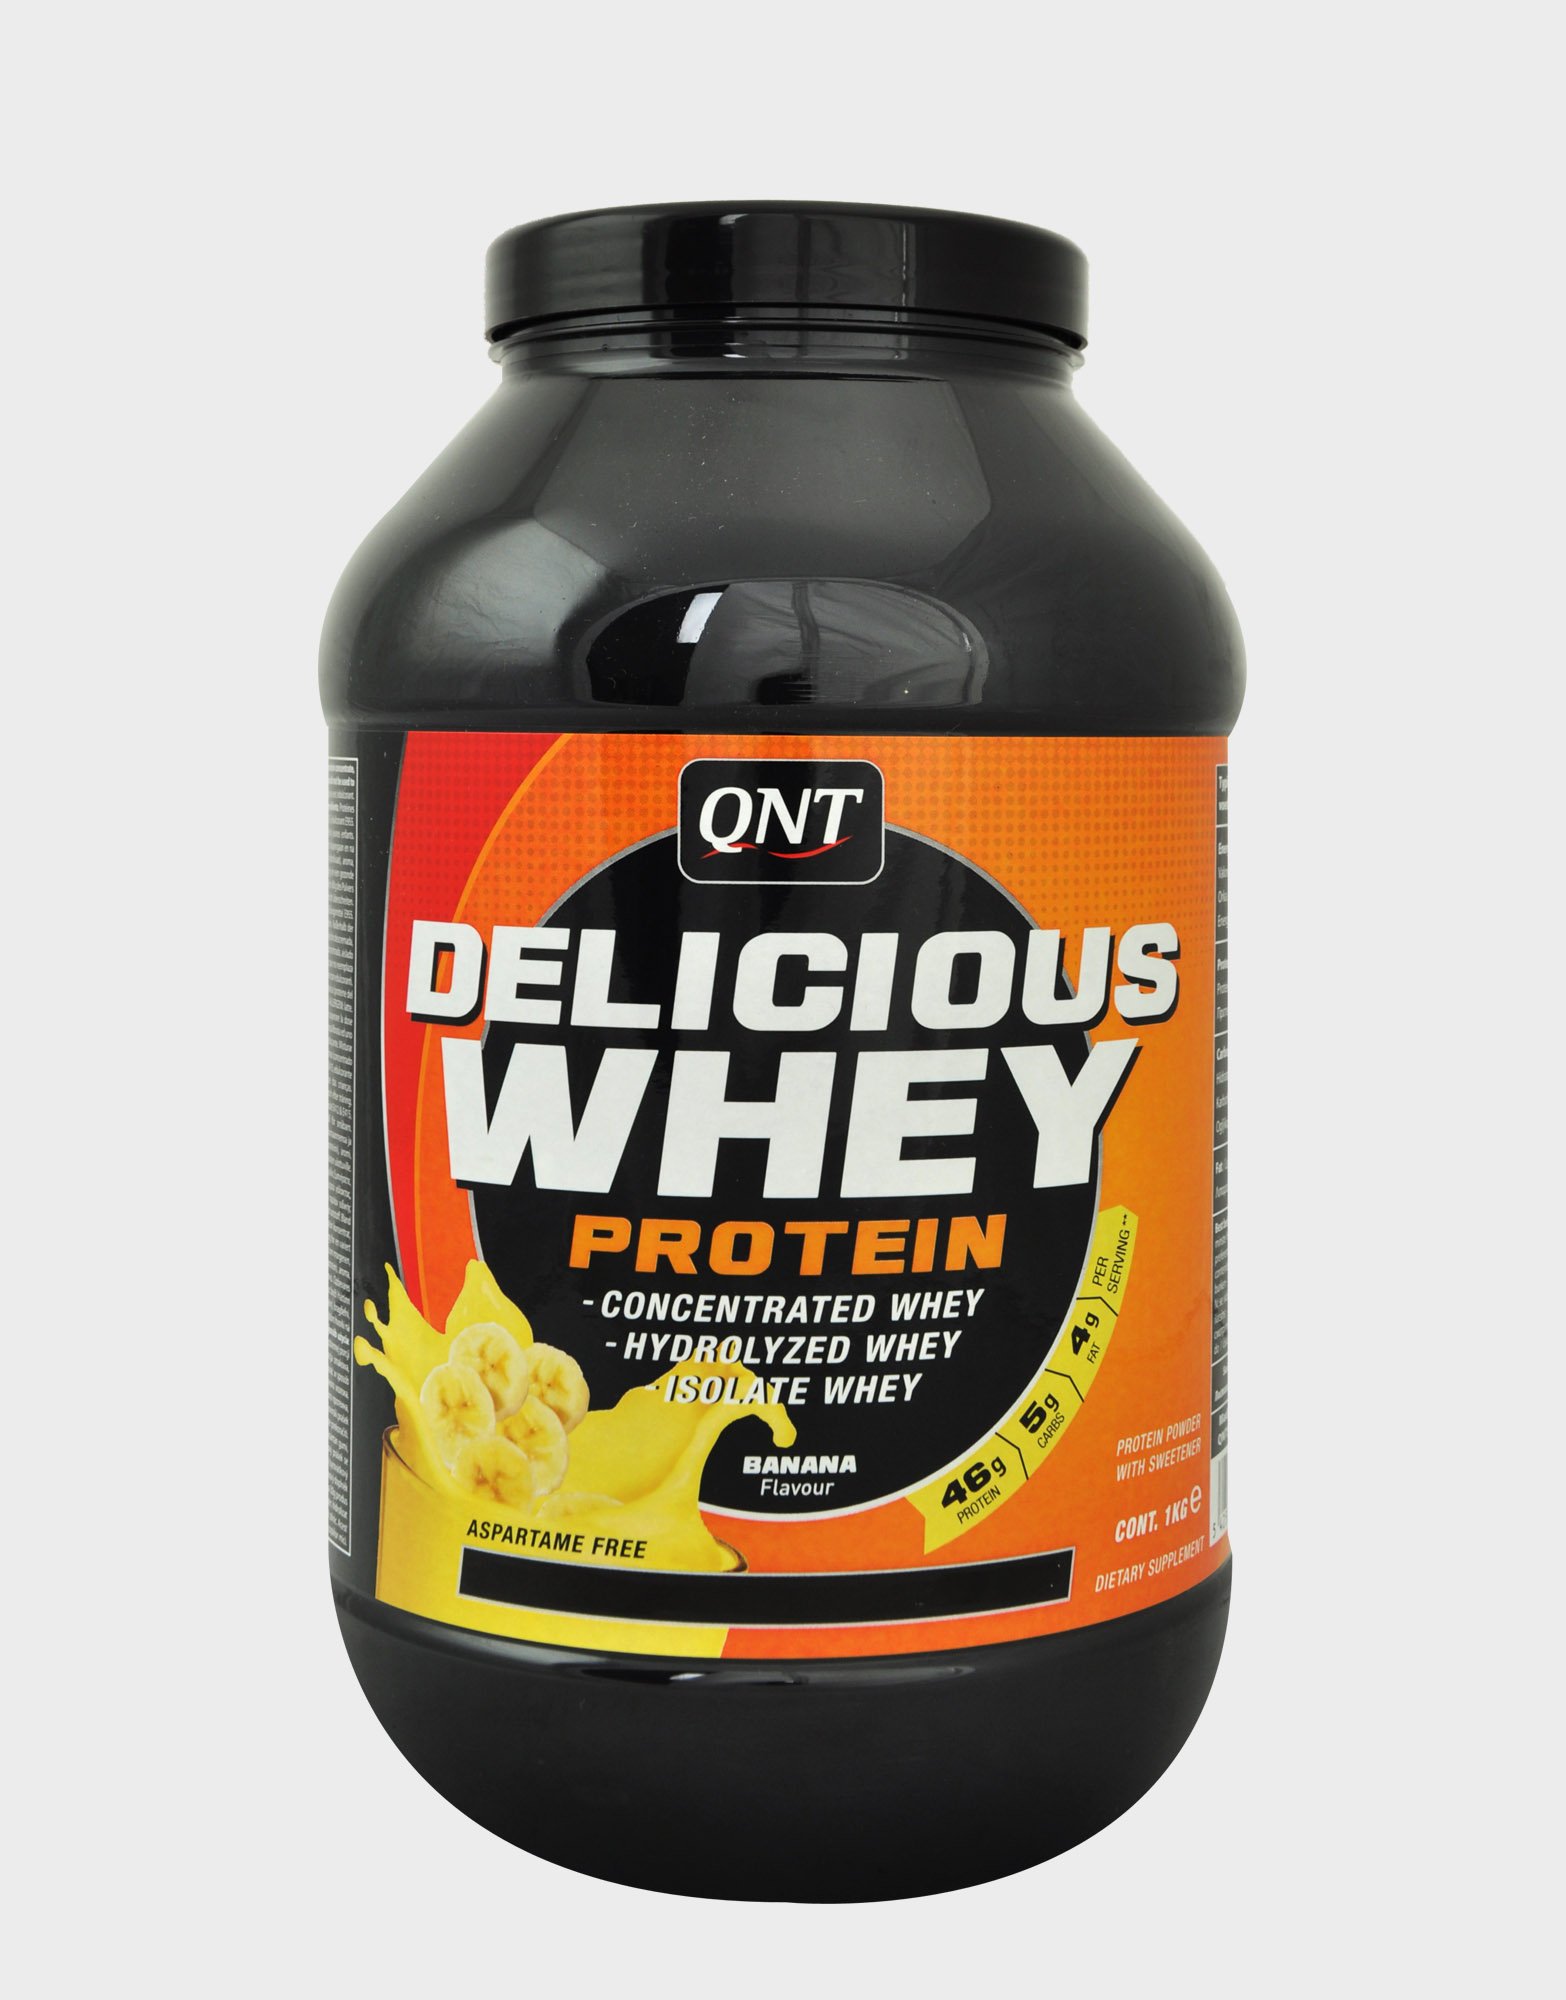 Delicious Whey Protein, 1000 g, QNT. Whey Concentrate. Mass Gain recovery Anti-catabolic properties 